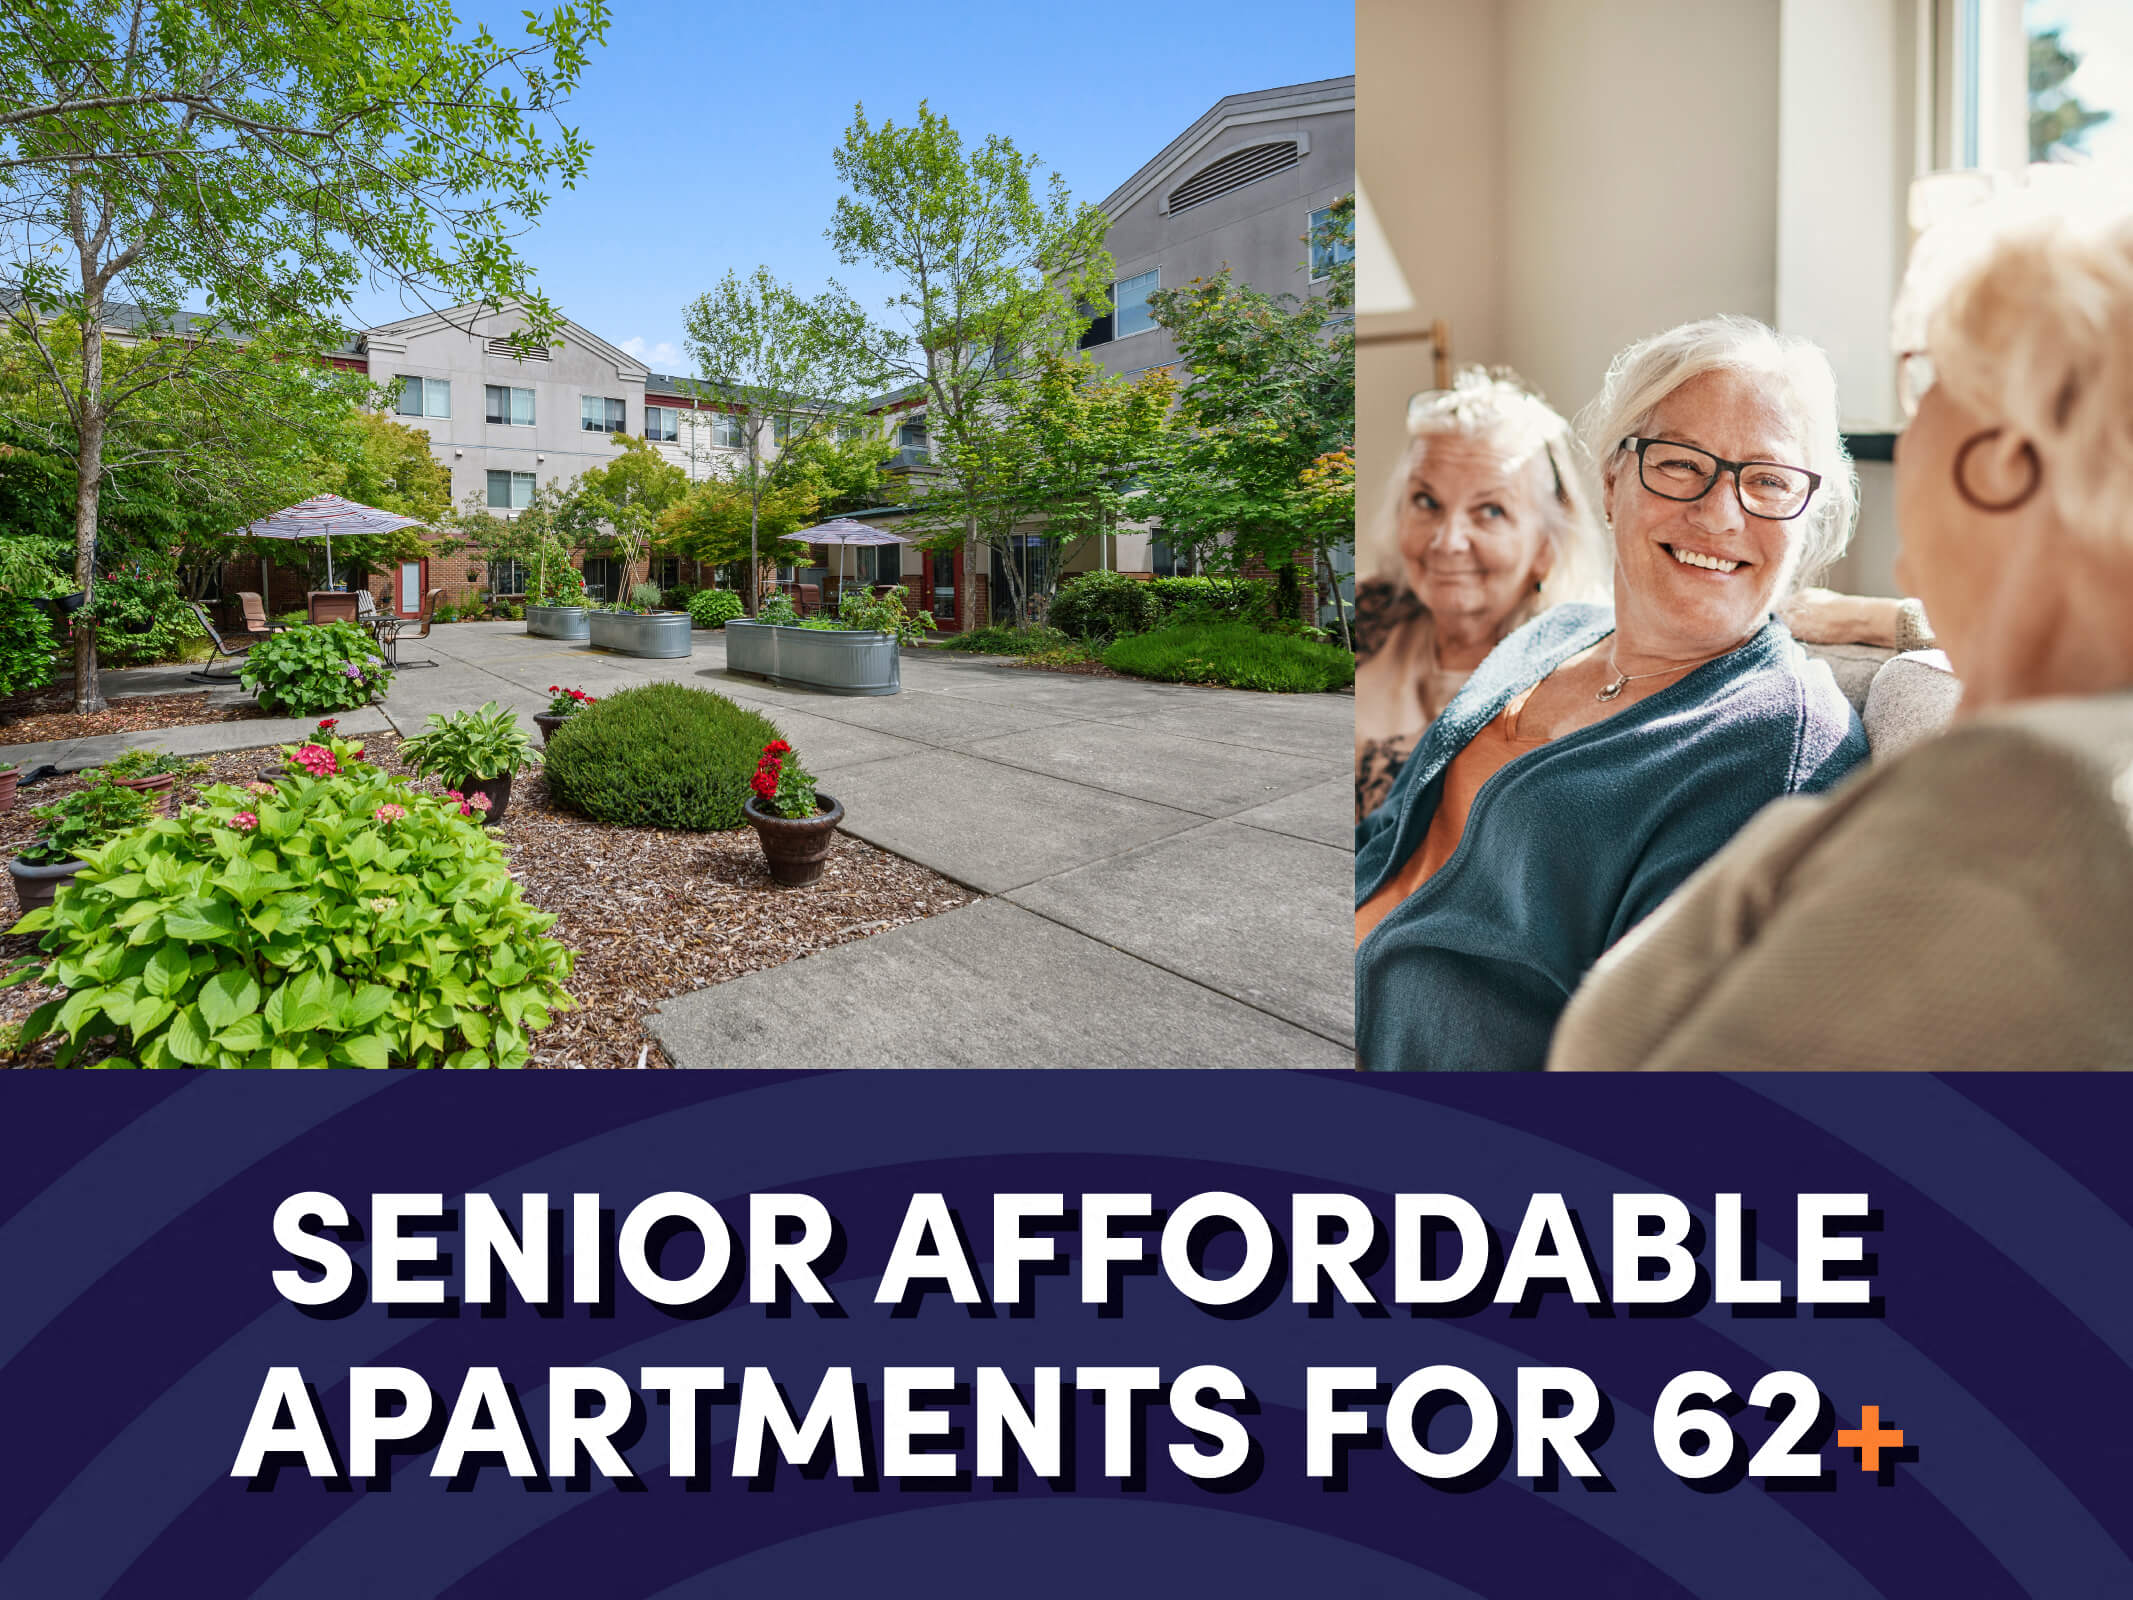 a landscaped courtyard next to three seniors sitting side by side above text that reads “Senior Affordable Apartments for 62+” for the Woodrose Senior Affordable Apartments in Bellingham, Washington.